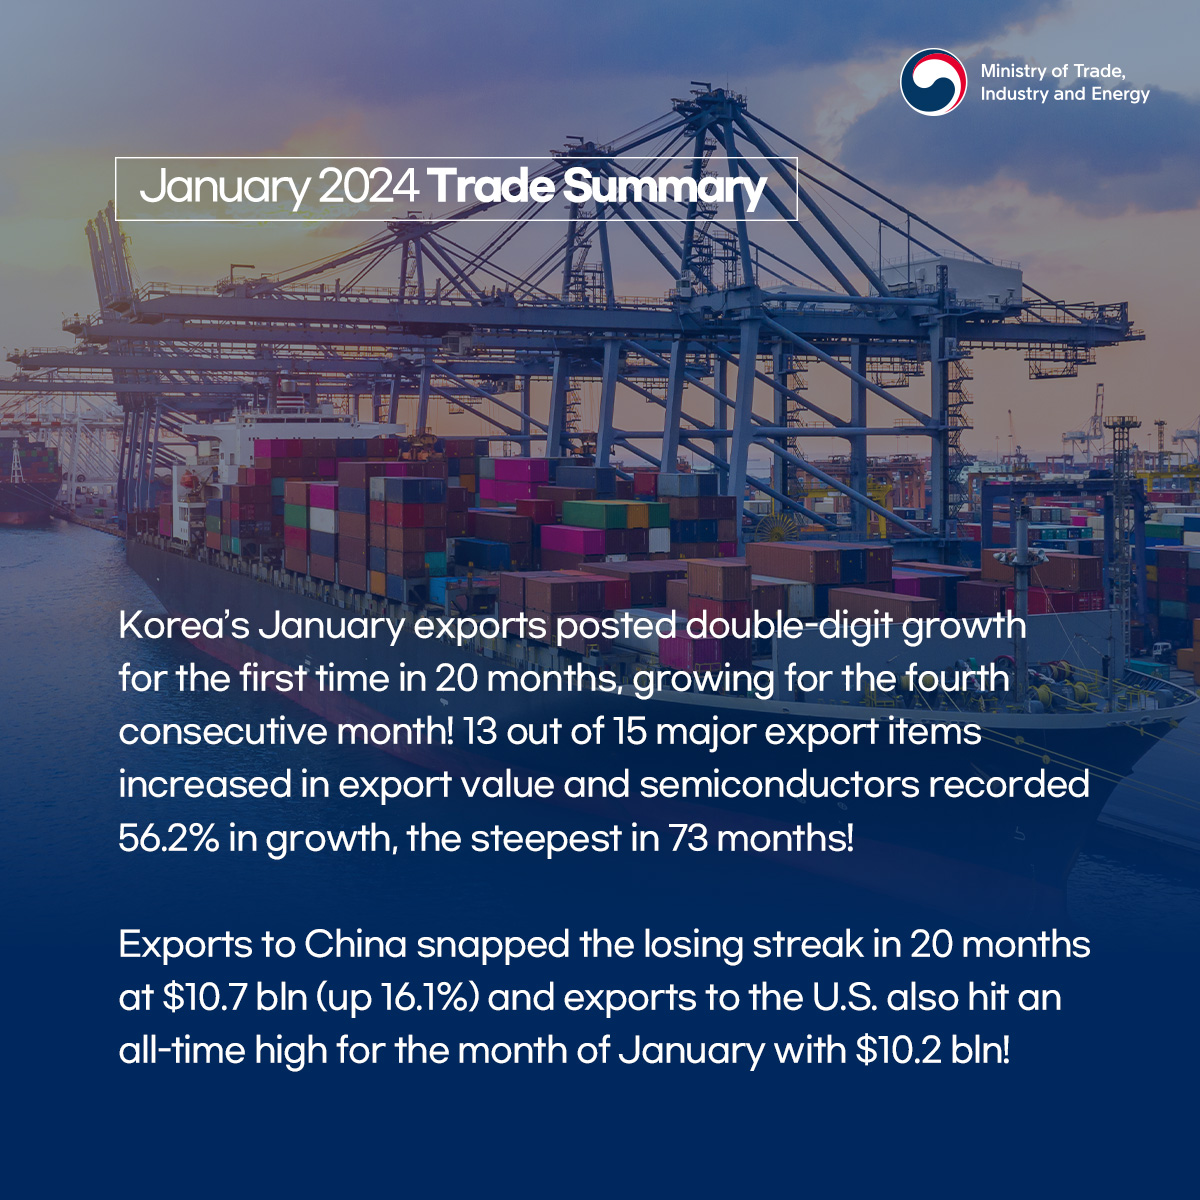 Ministry of Trade, Industry and Energy
January 2024 Trade Summary
Korea's January exports posted double-digit growth for the first time in 20 months, growing for the fourth consecutive month! 13 out of 15 major export items increased in export value and semiconductors recorded 56.2% in growth, the steepest in 73 months!
Exports to China snapped the losing streak in 20 months at $10.7 bln (up 16.1%) and exports to the U.S. also hit an all-time high for the month of January with $10.2 bln!